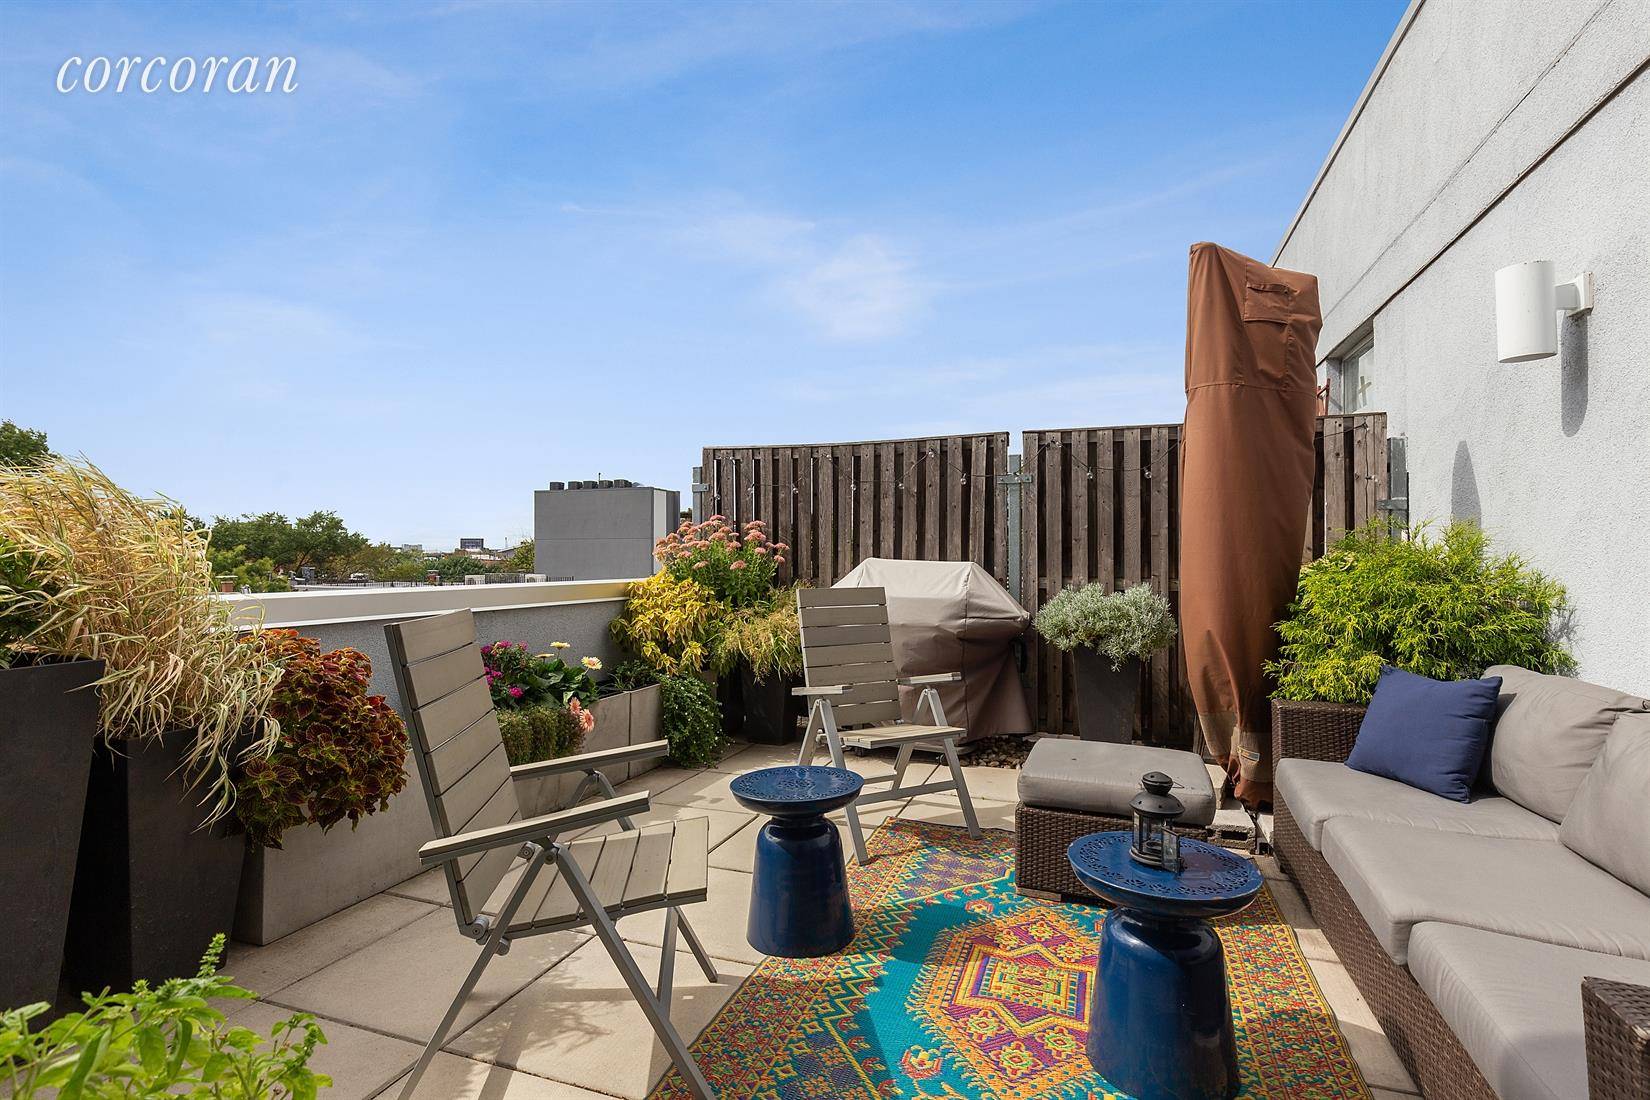 This large, two bedroom, two bath condo offers a wonderful, split bedroom layout, a 250 square foot PRIVATE ROOF TERRACE, and separate basement storage, all in a fantastically central Park ...